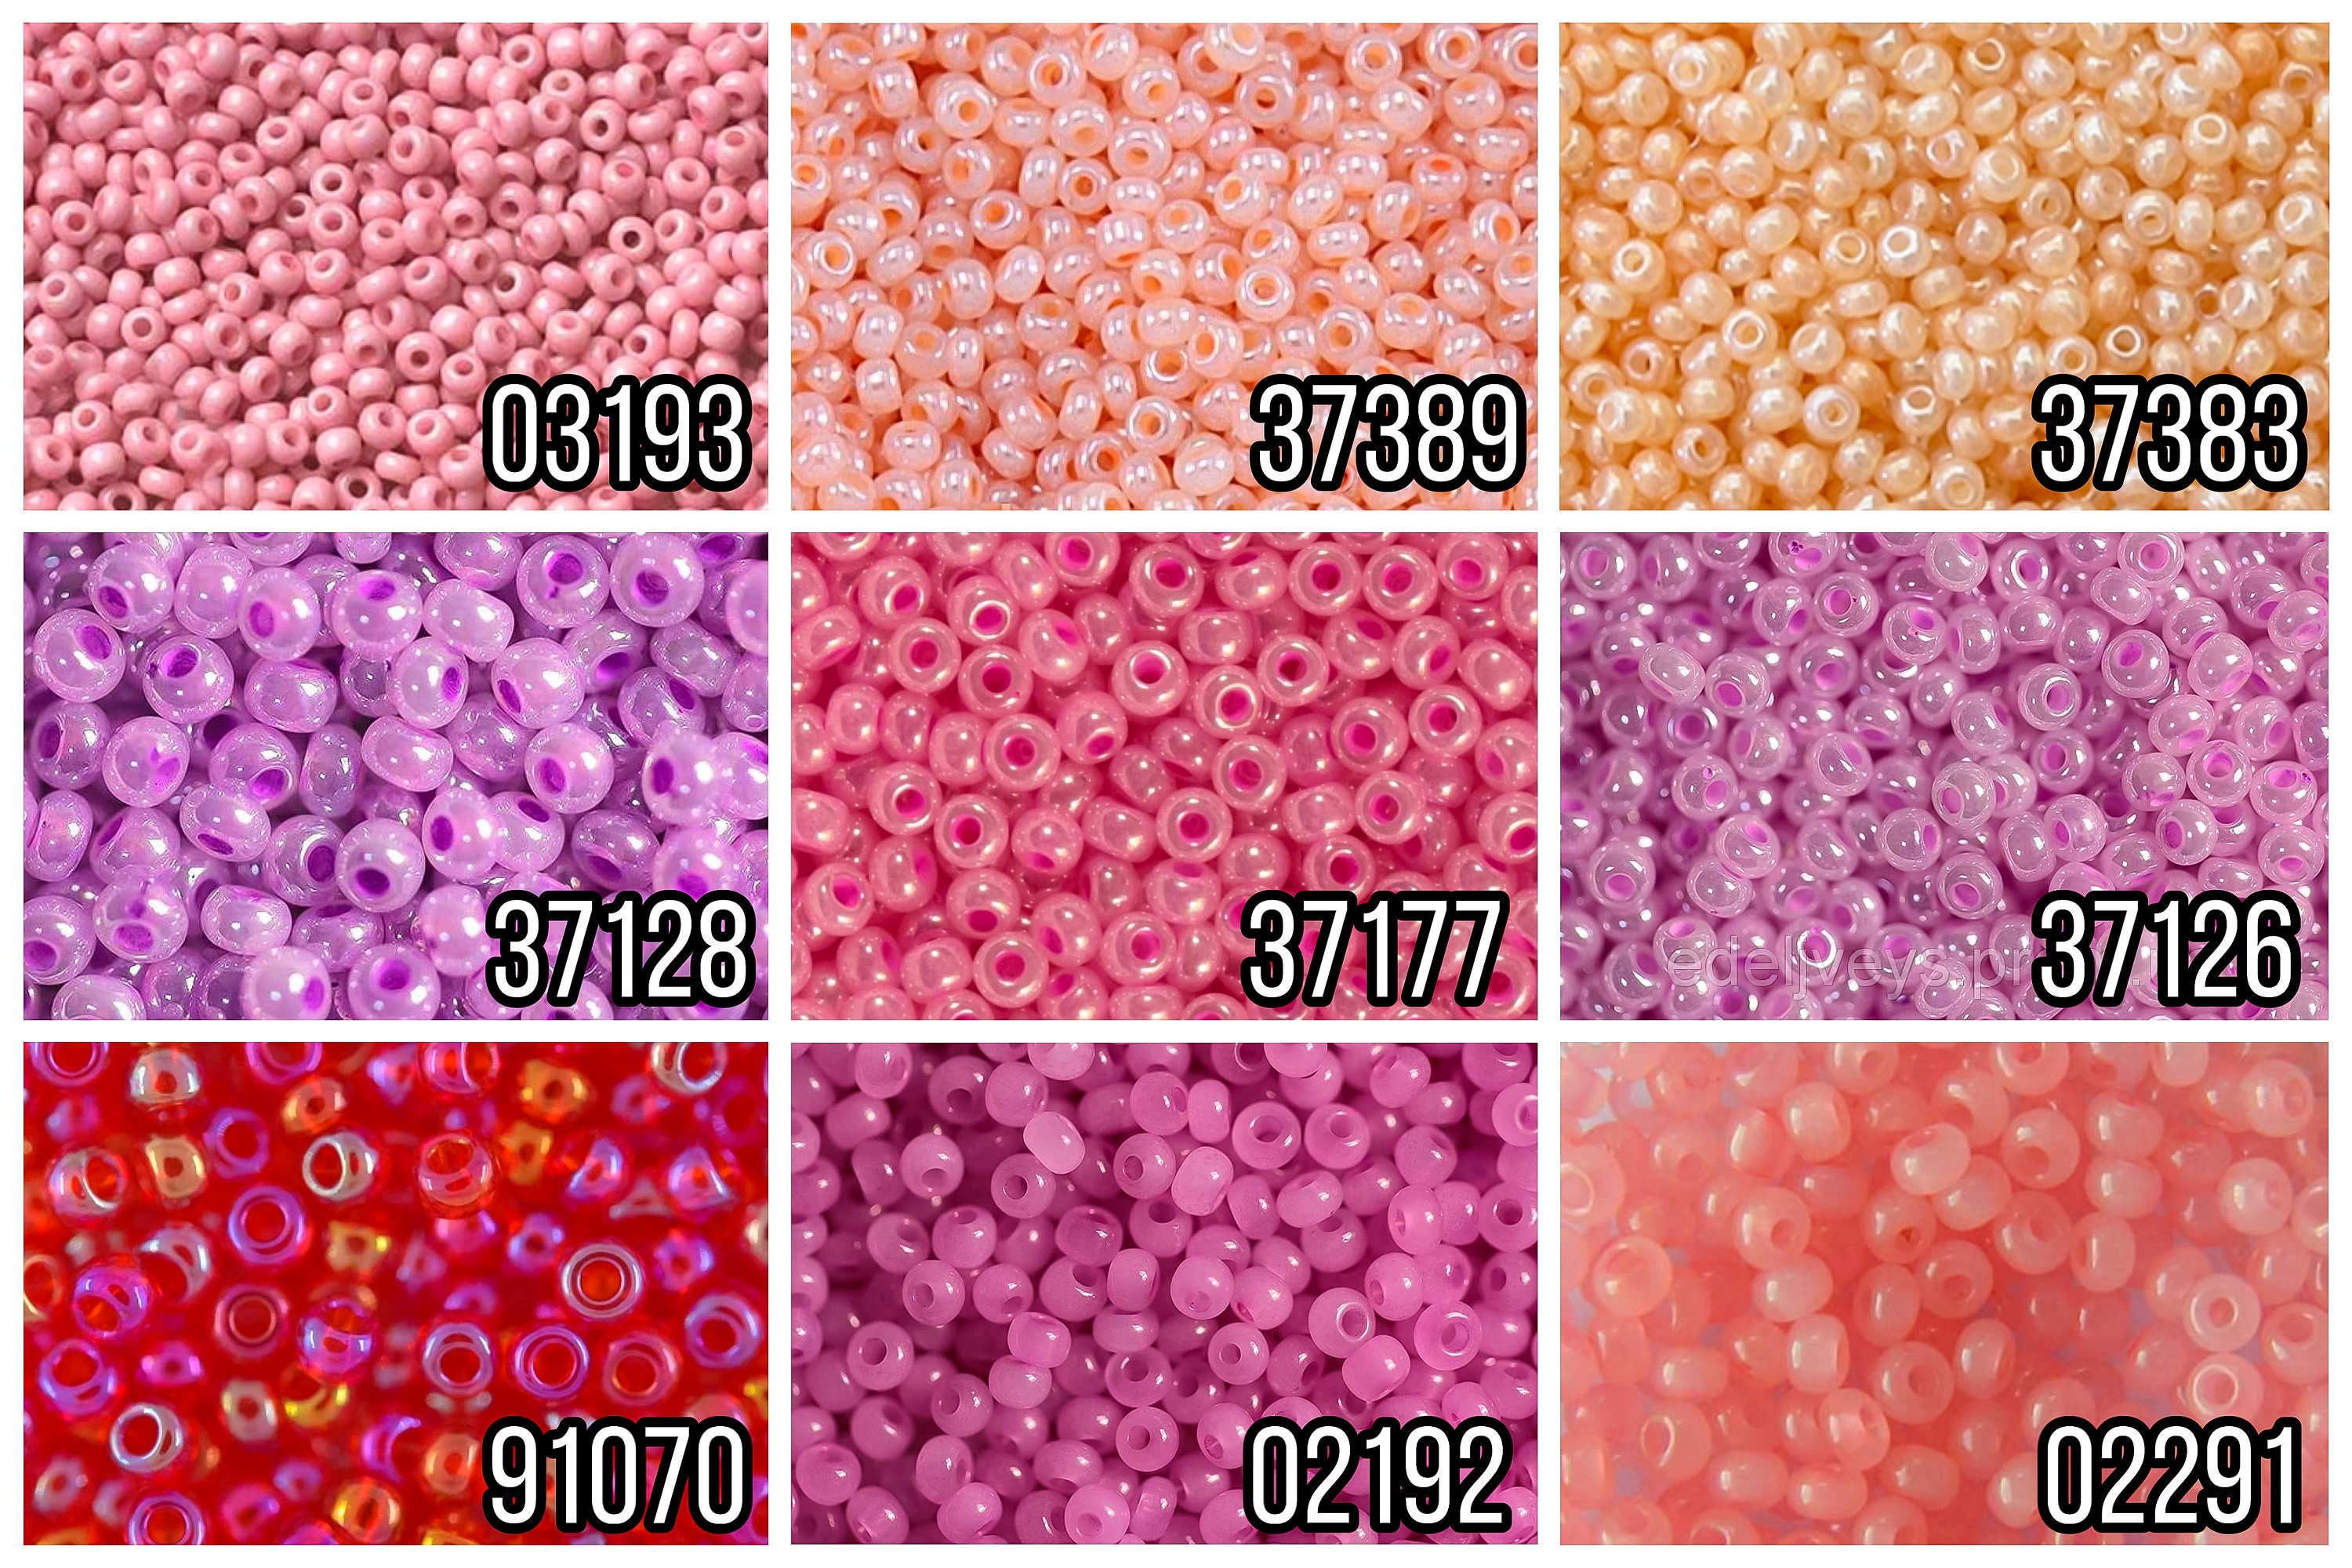 Rocaille seed beads, Dia. 3 mm, size 8/0 , hole size 0,6-1,0 mm, pink, 25  g/ 1 pack